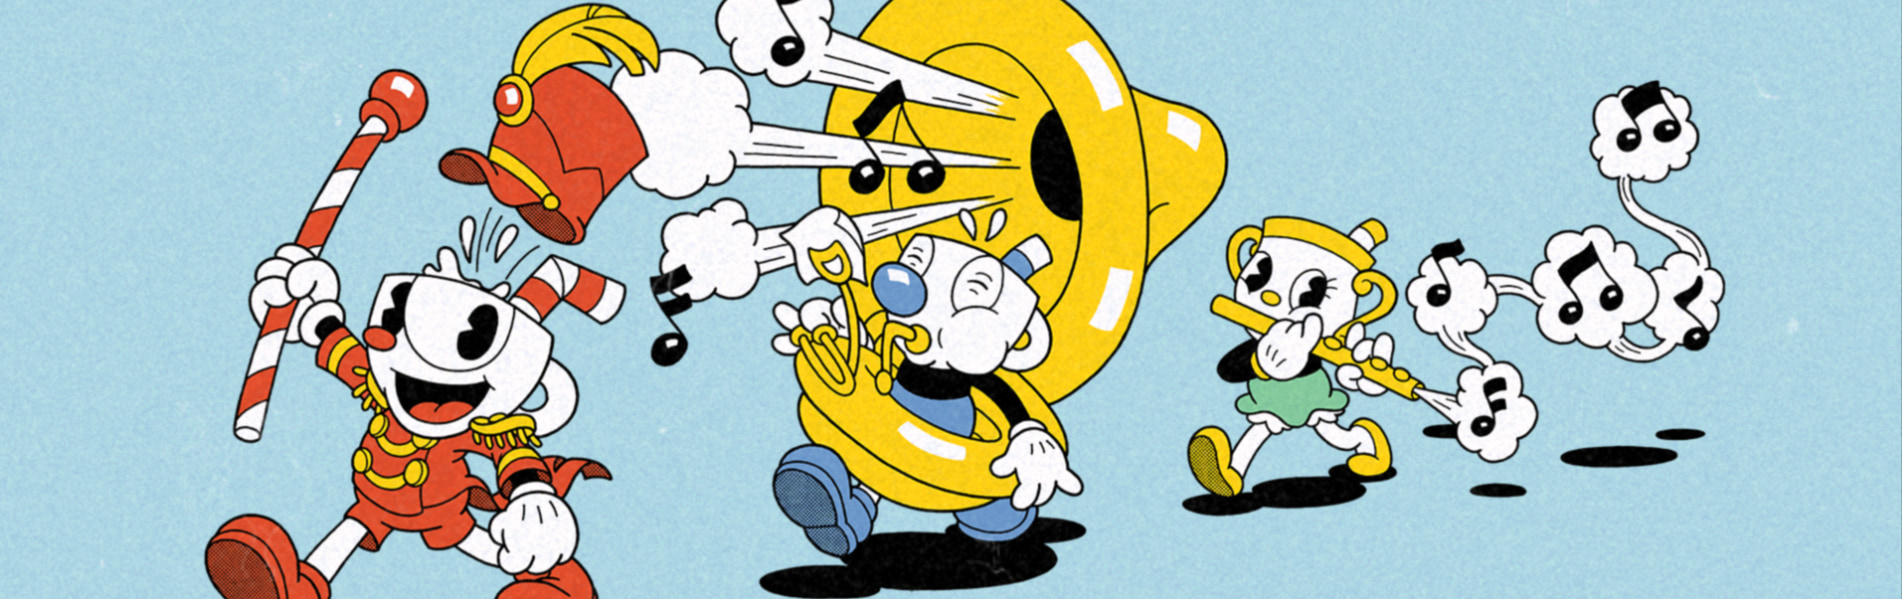 Cup Head Store Banner 2 - Cuphead Store